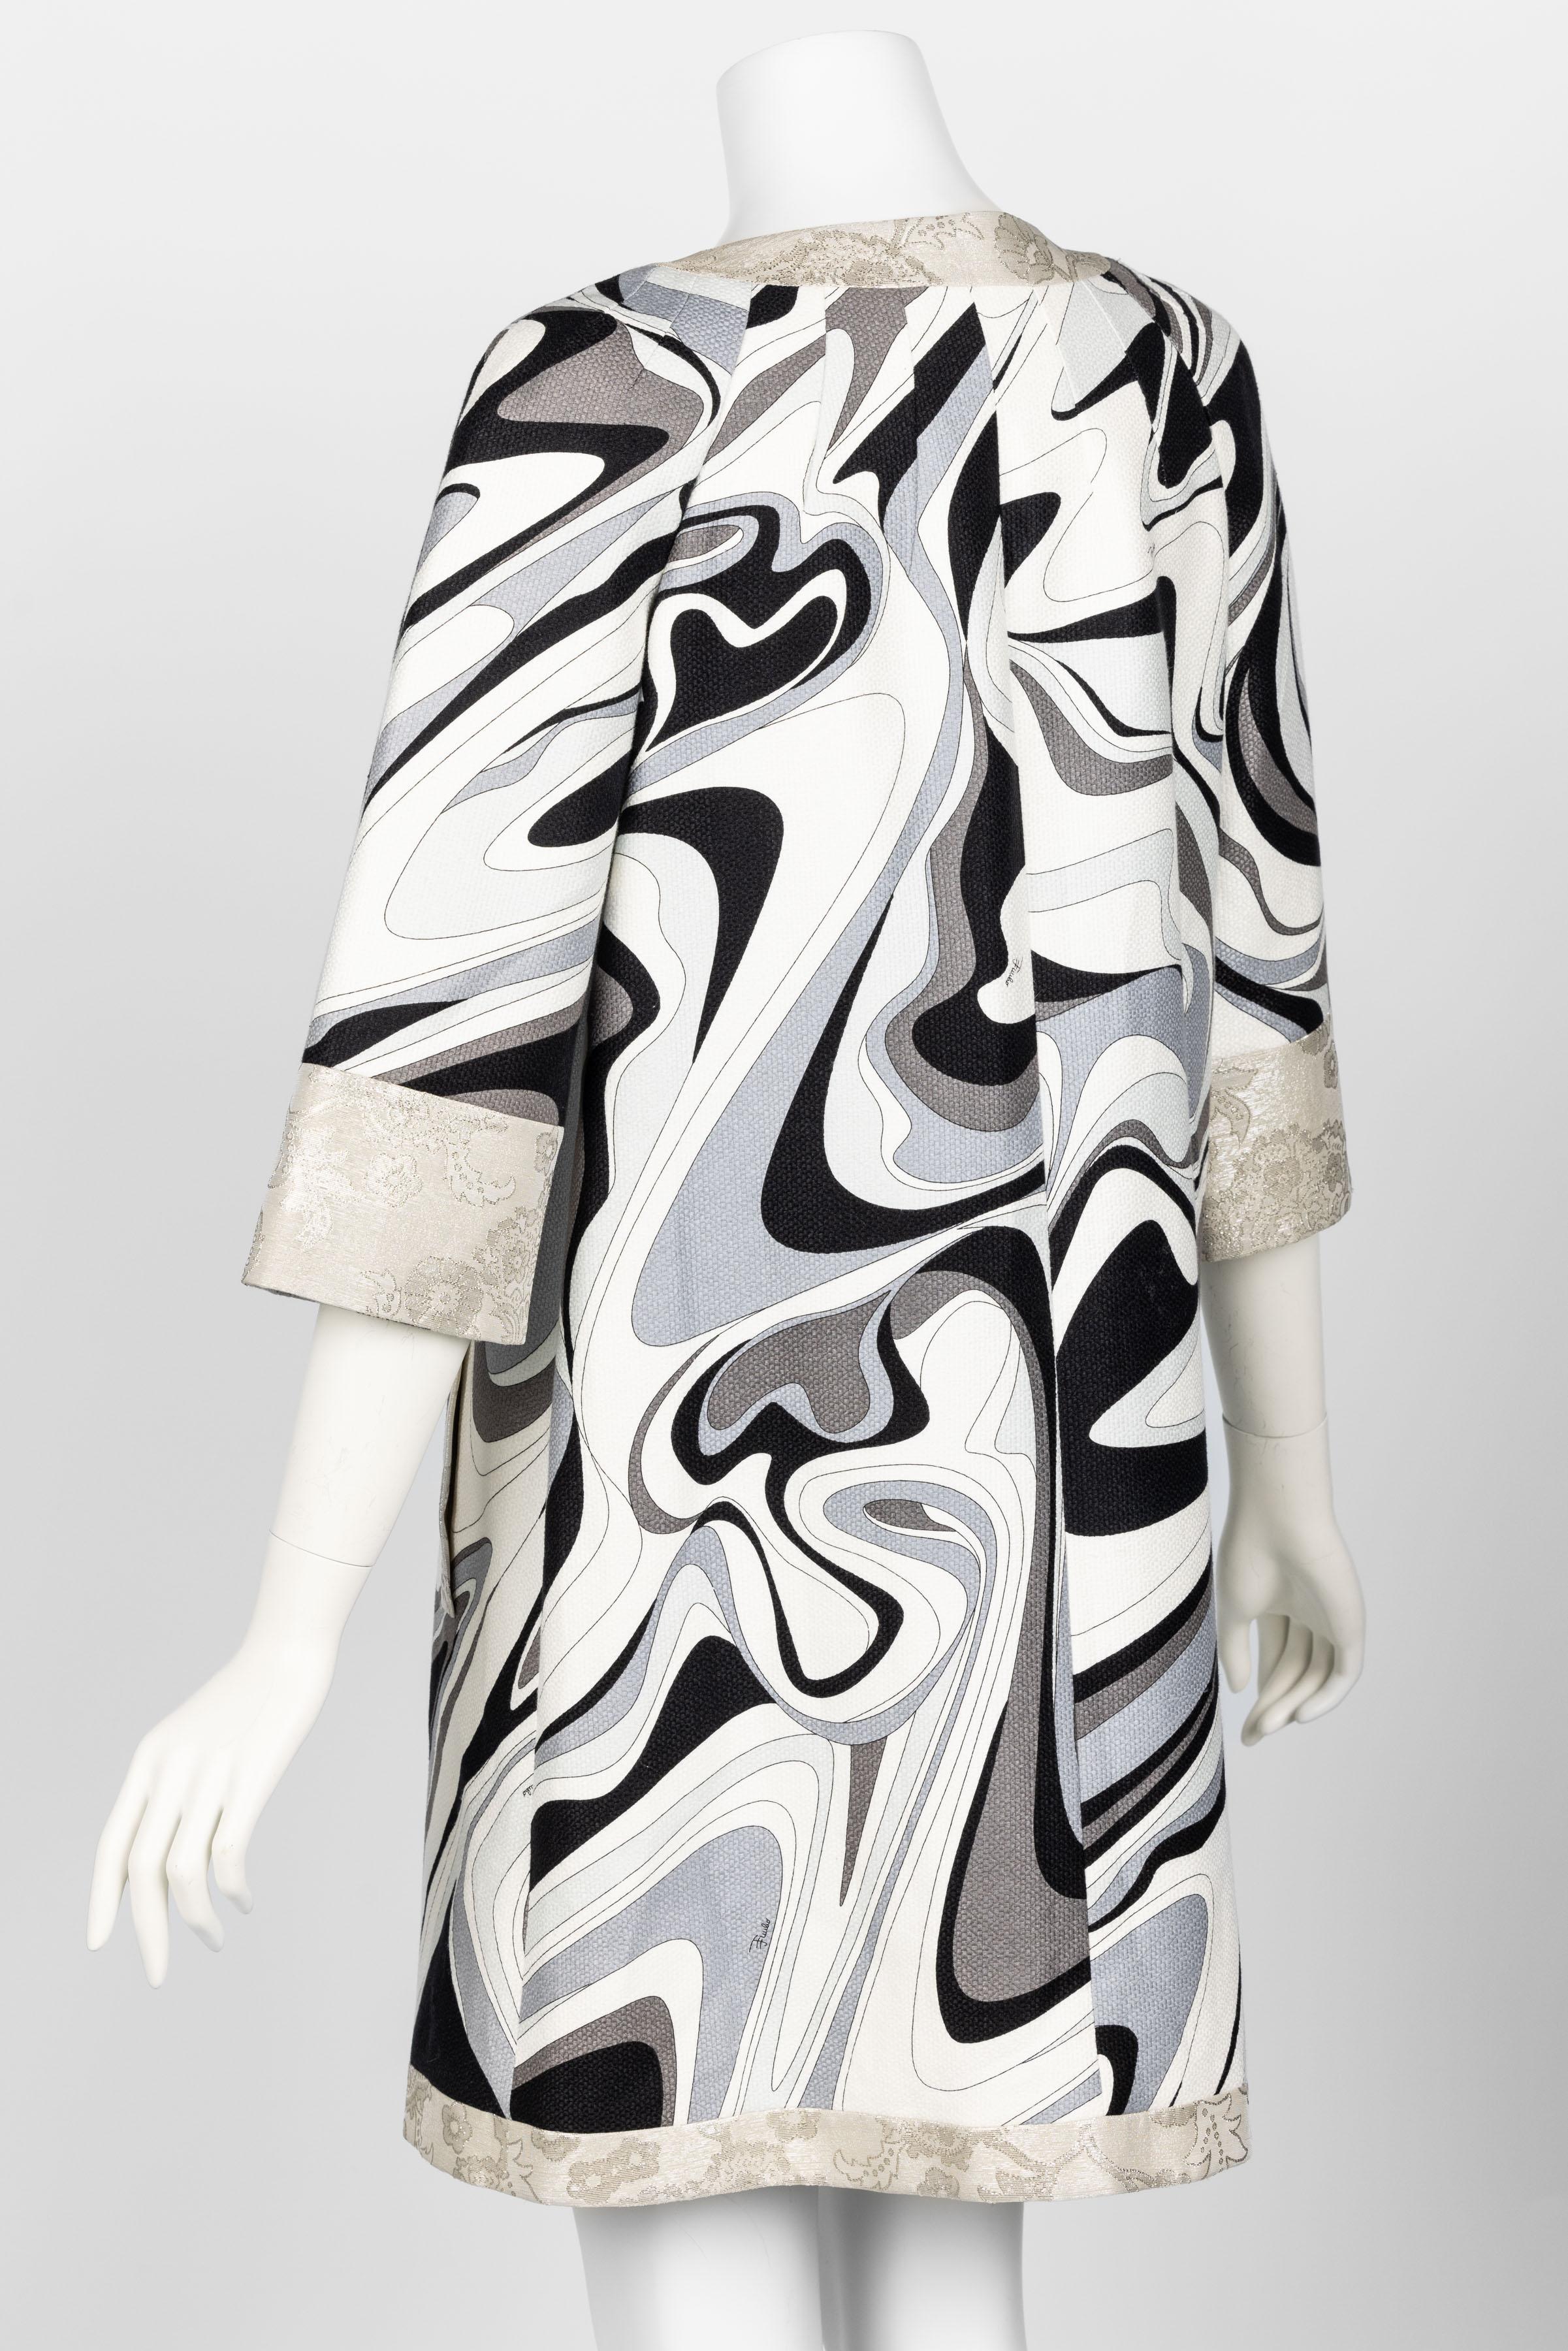 Emilio Pucci Silver Black Print Spring 2007 Runway Evening Coat For Sale 1